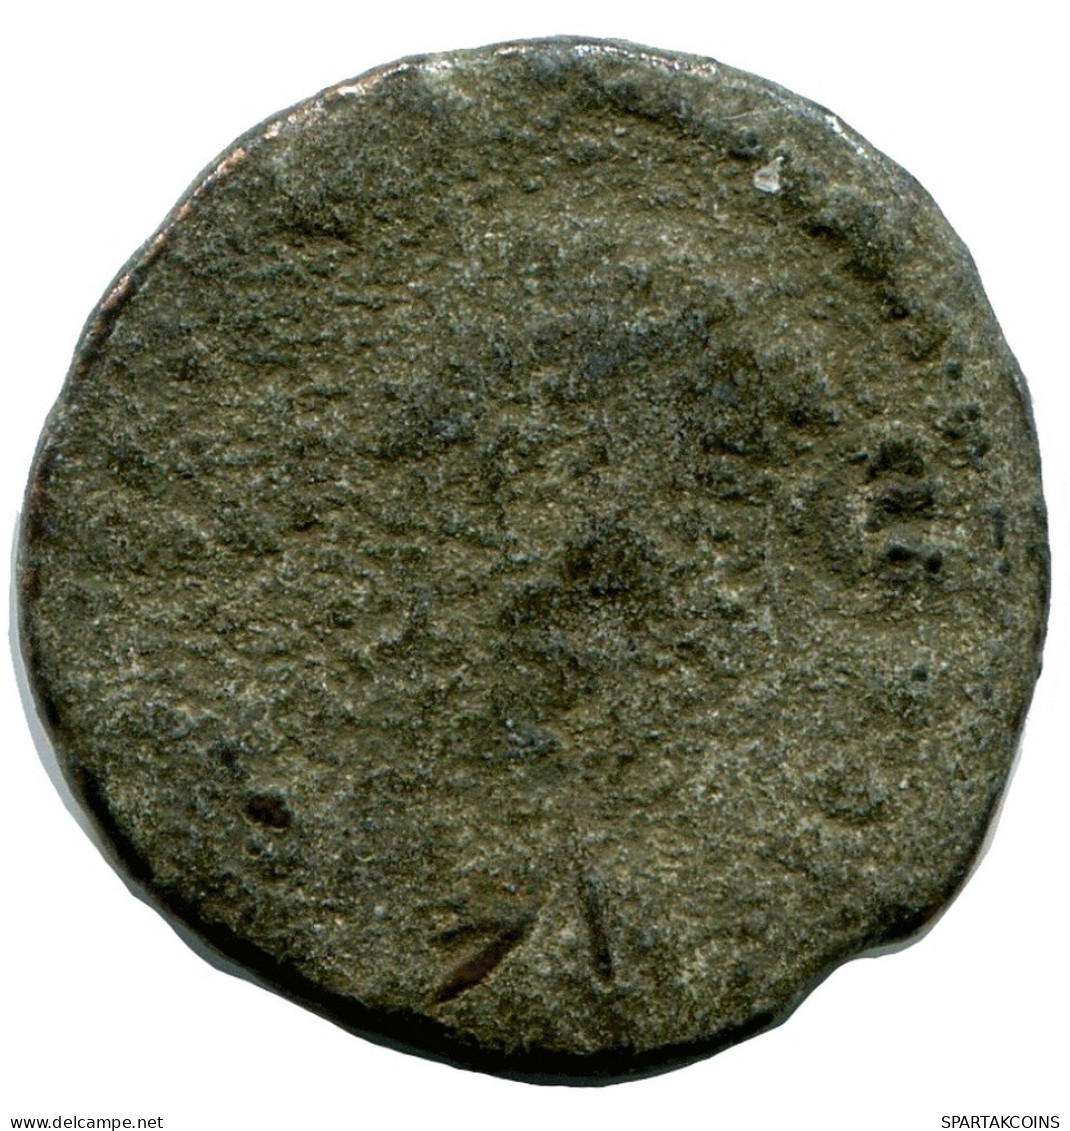 ROMAN Coin MINTED IN ALEKSANDRIA FROM THE ROYAL ONTARIO MUSEUM #ANC10186.14.D.A - The Christian Empire (307 AD To 363 AD)